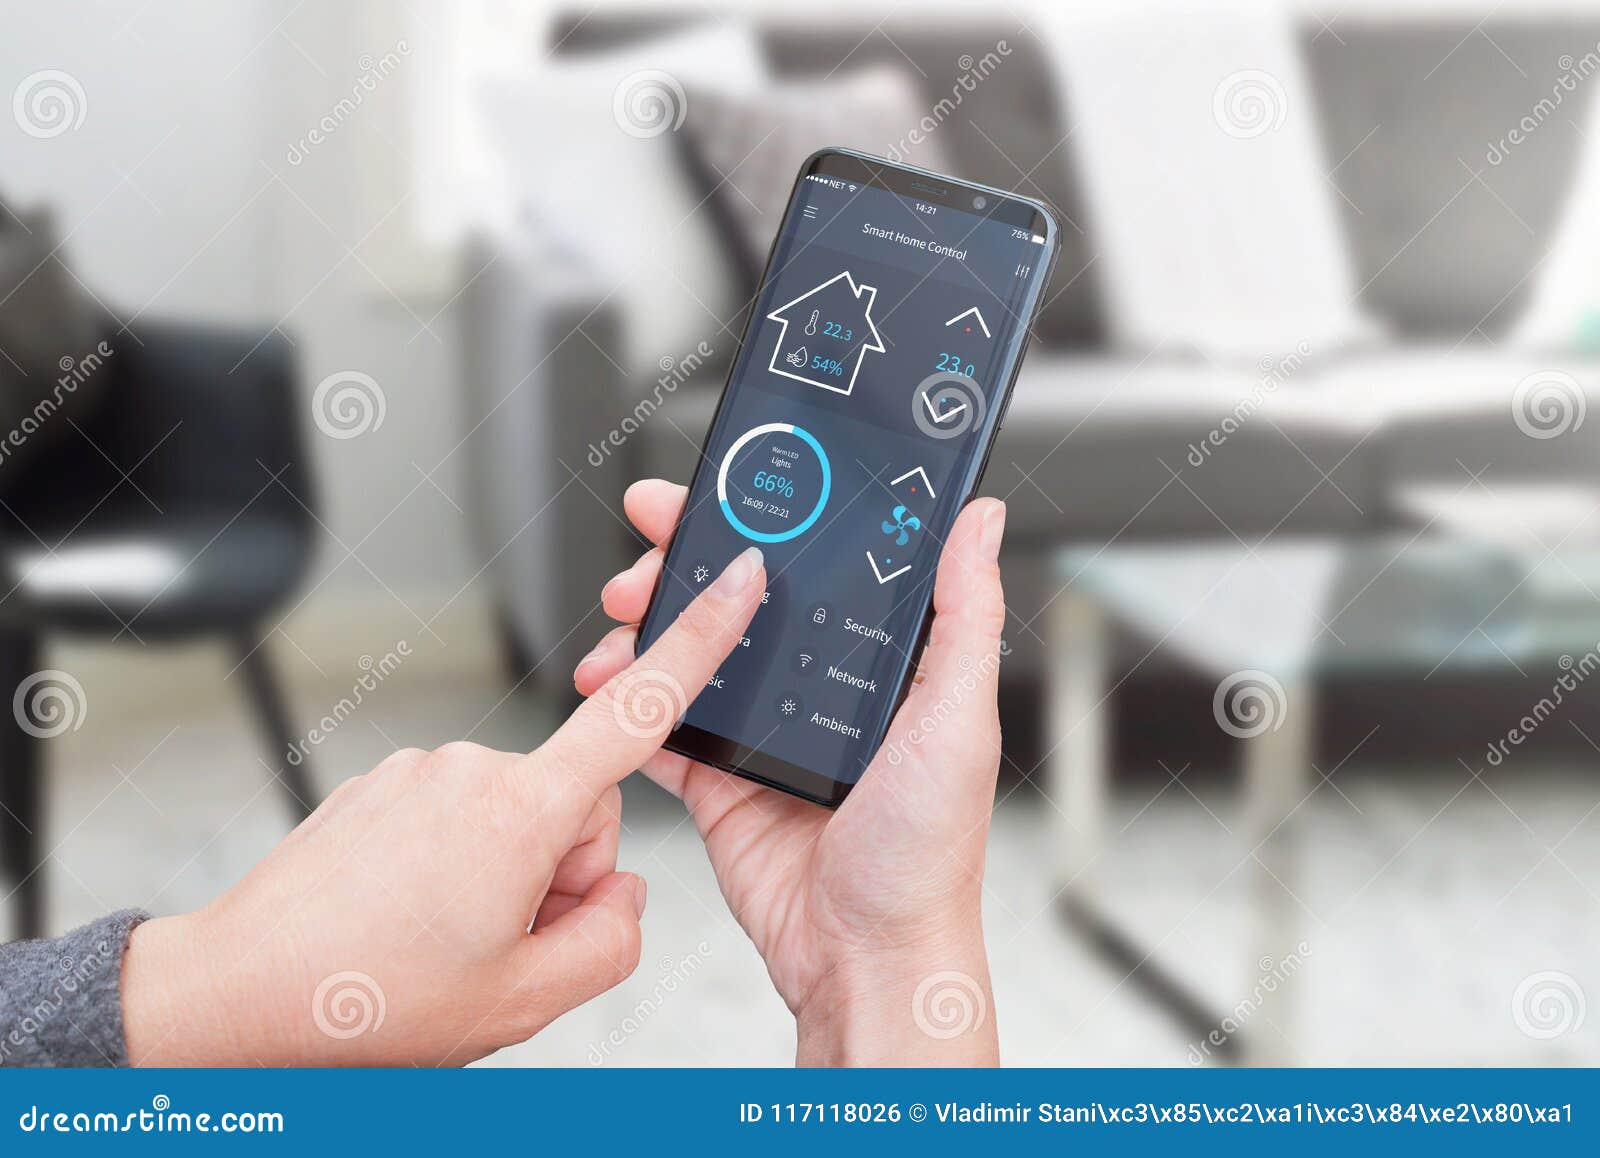 woman control light in living room interior with smart home control app on modern mobile devices